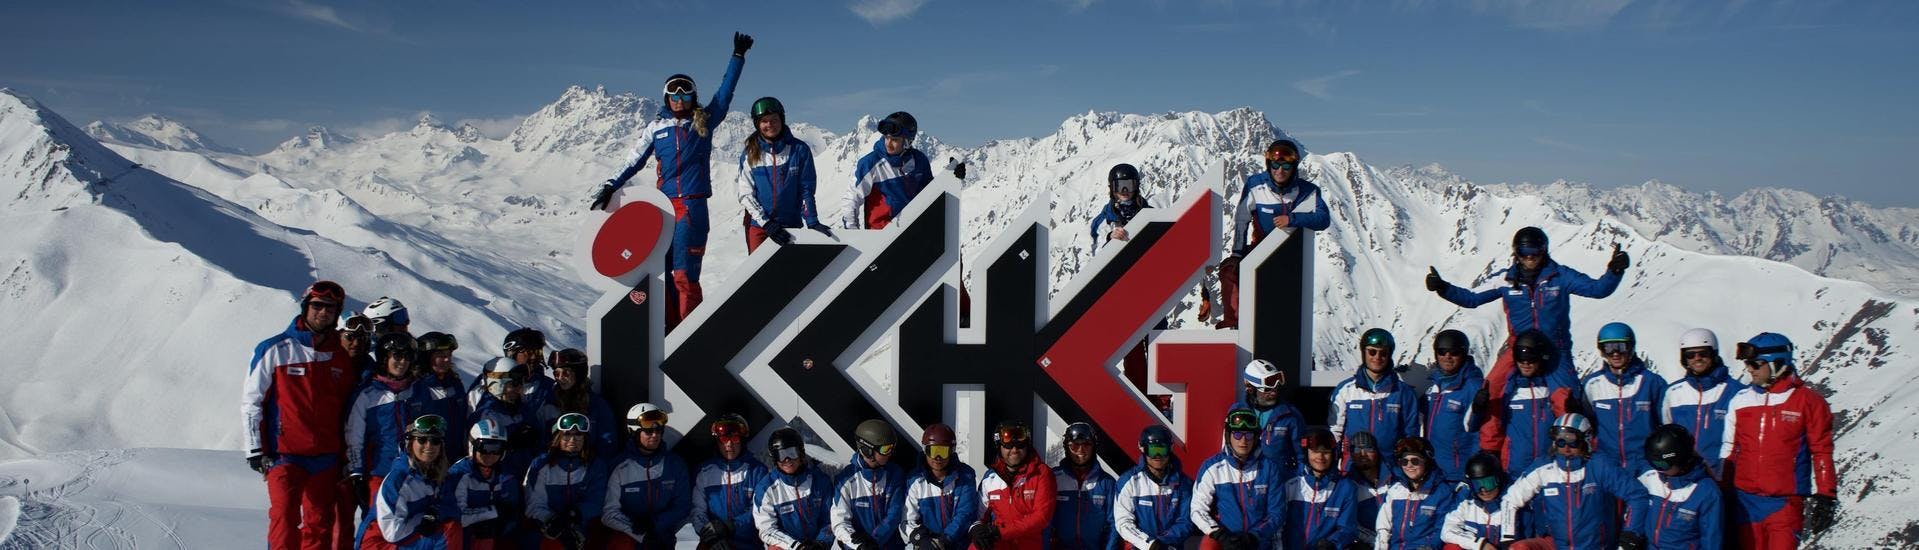 The ski instructors from Skischule Ischgl Schneesport Akademie are gathered around the logo of the ski school and are seemingly looking forward to teaching their ski lessons.